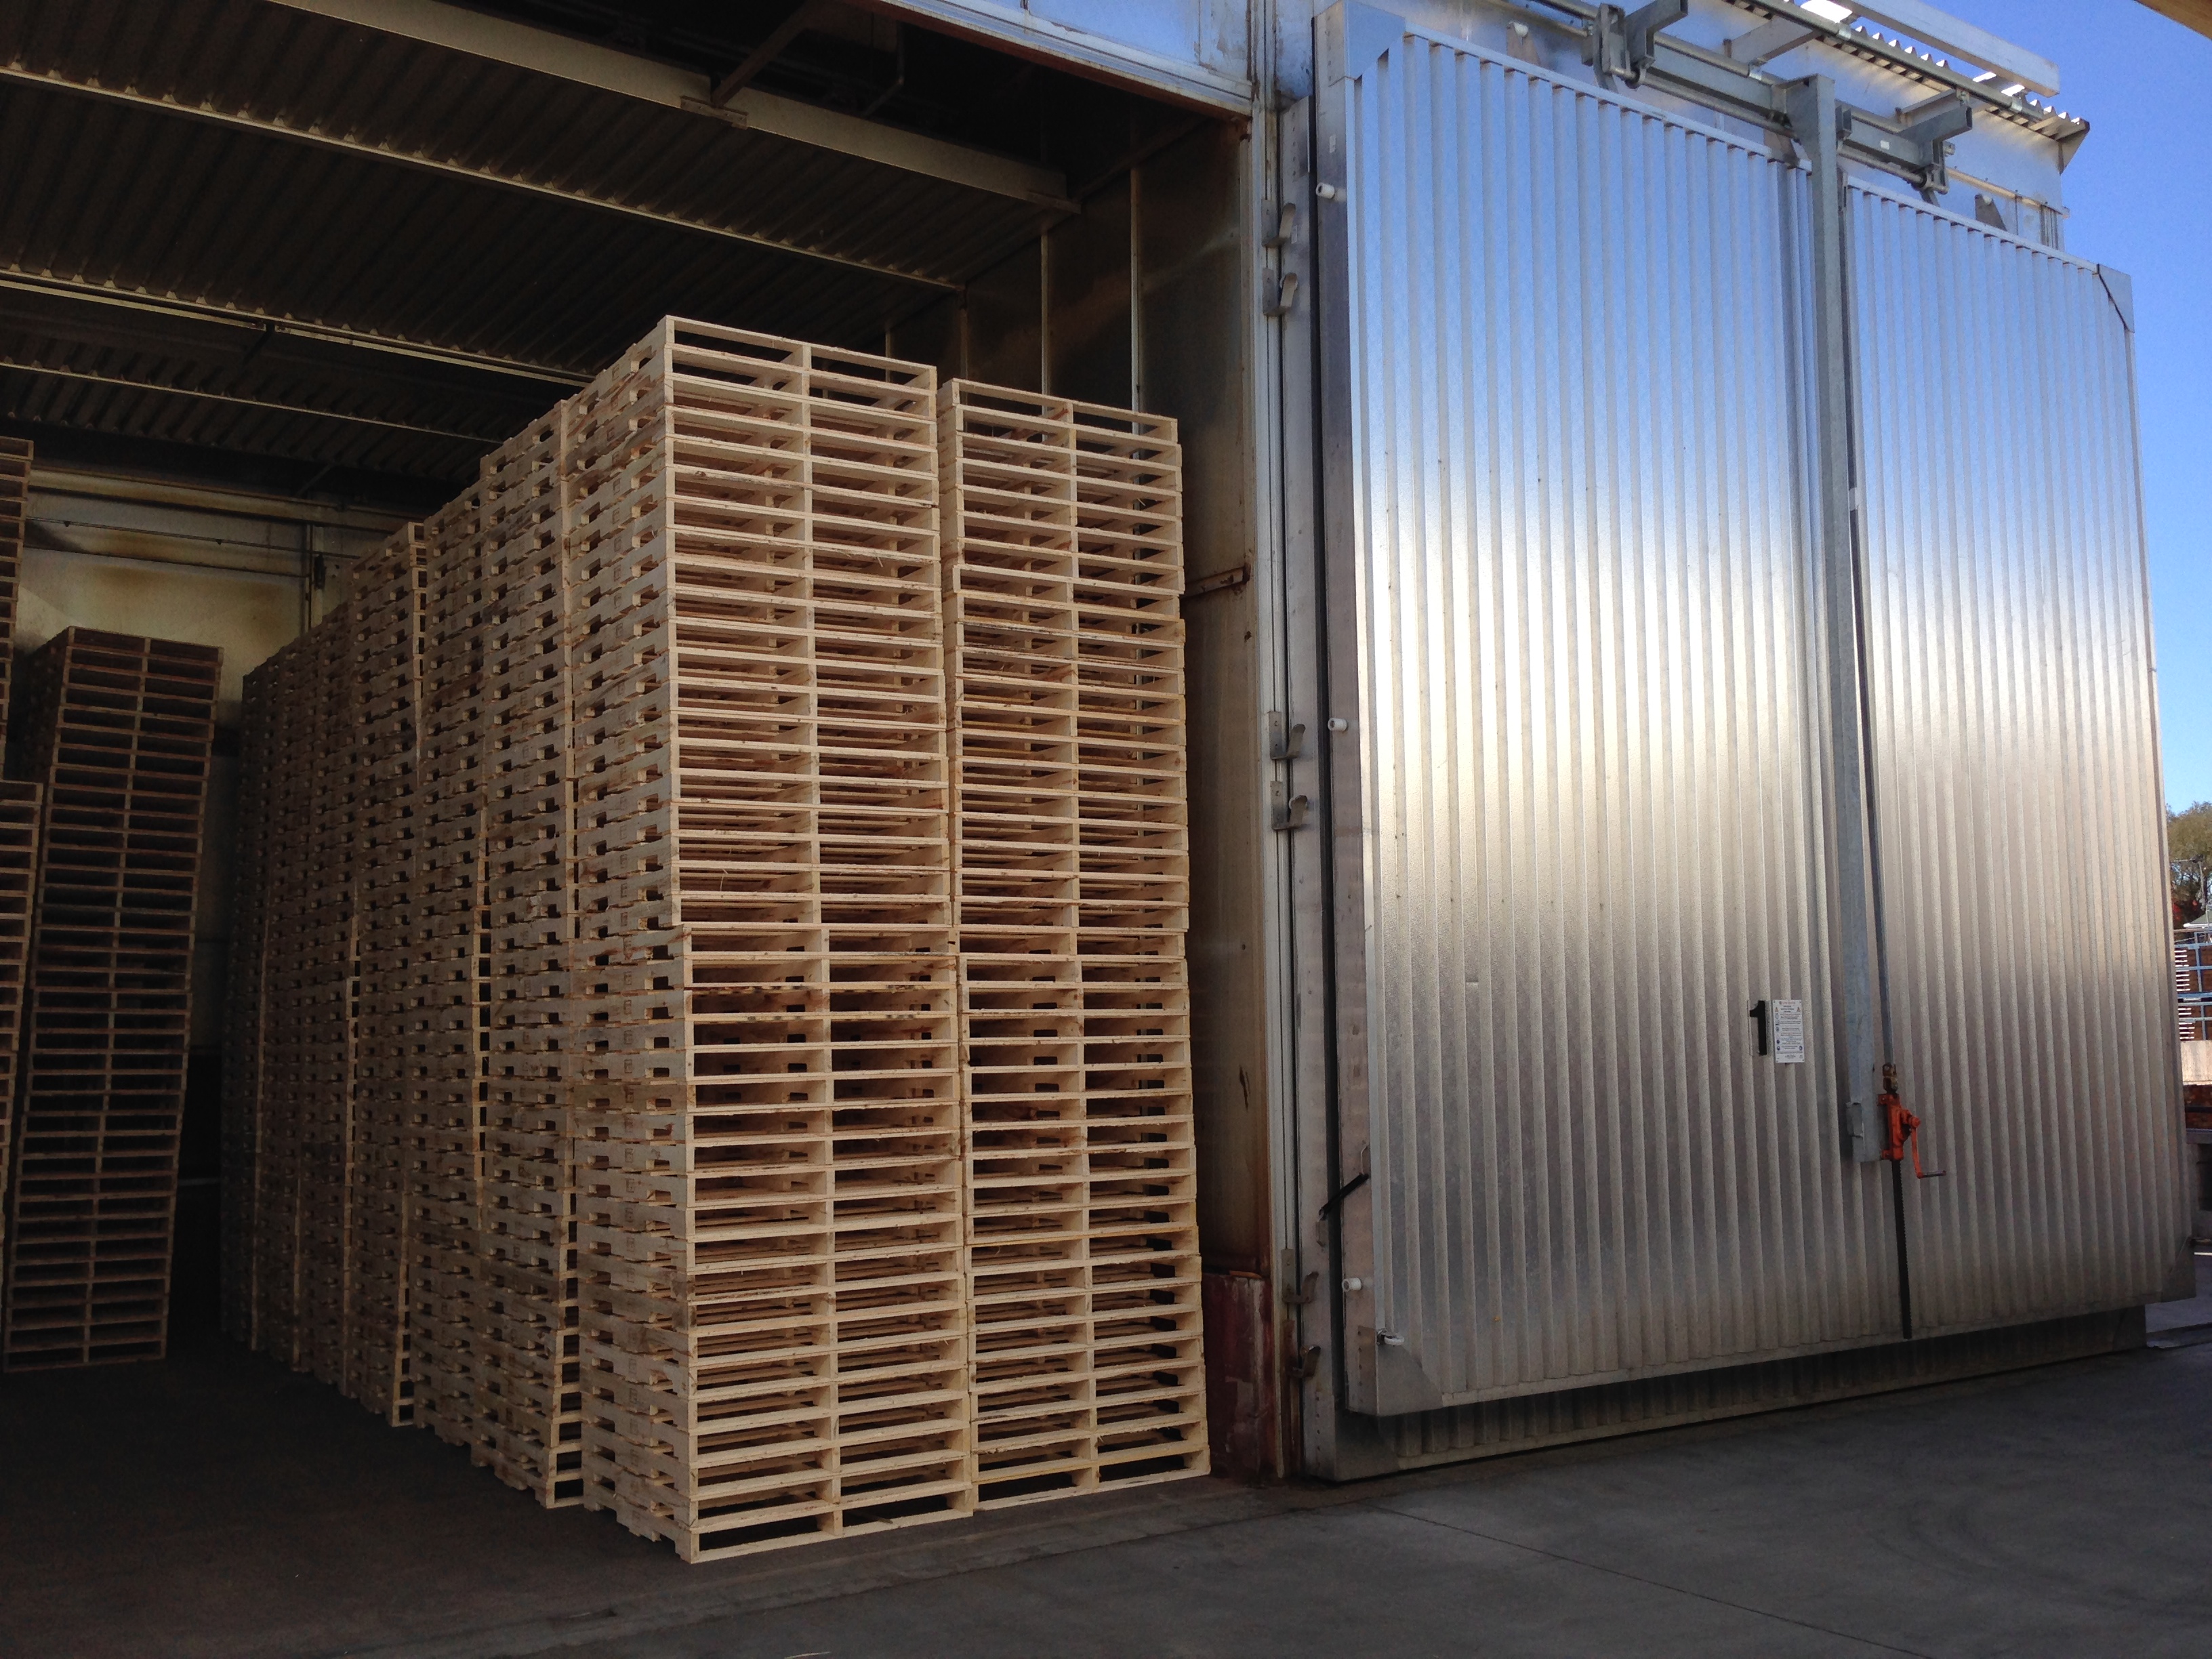 4 Questions to Ask Before Buying Pallets